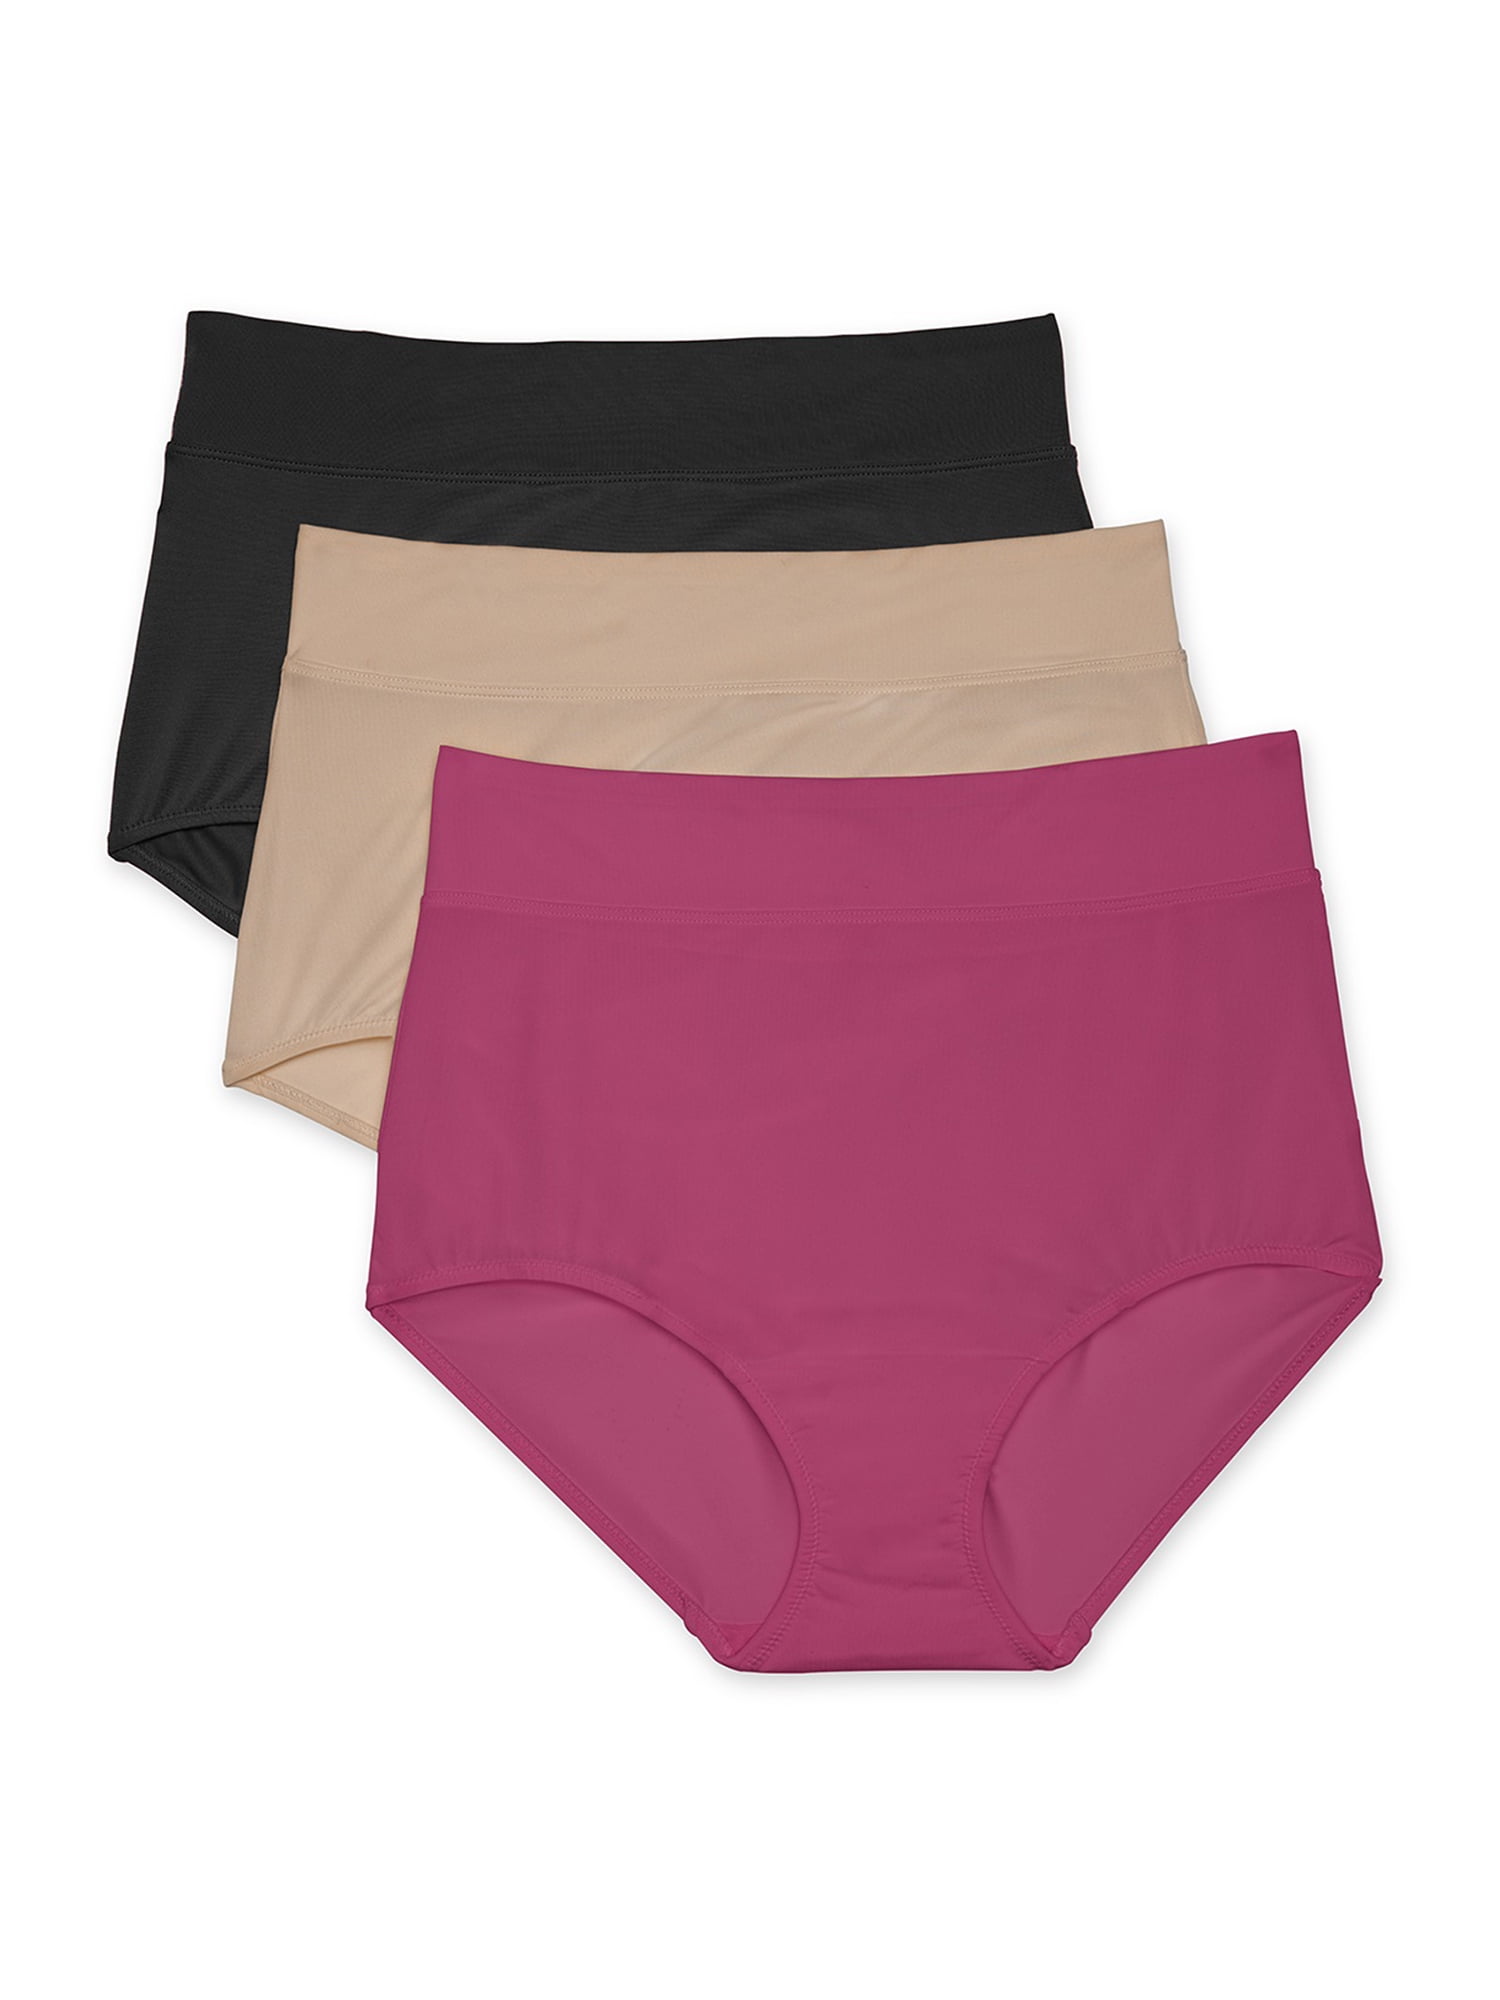 Blissful Benefits by Warner's? Women's No Muffin Top Brief 3-pack RS4383W  #Ad #Warner, #affiliate, #Women, #Blissful